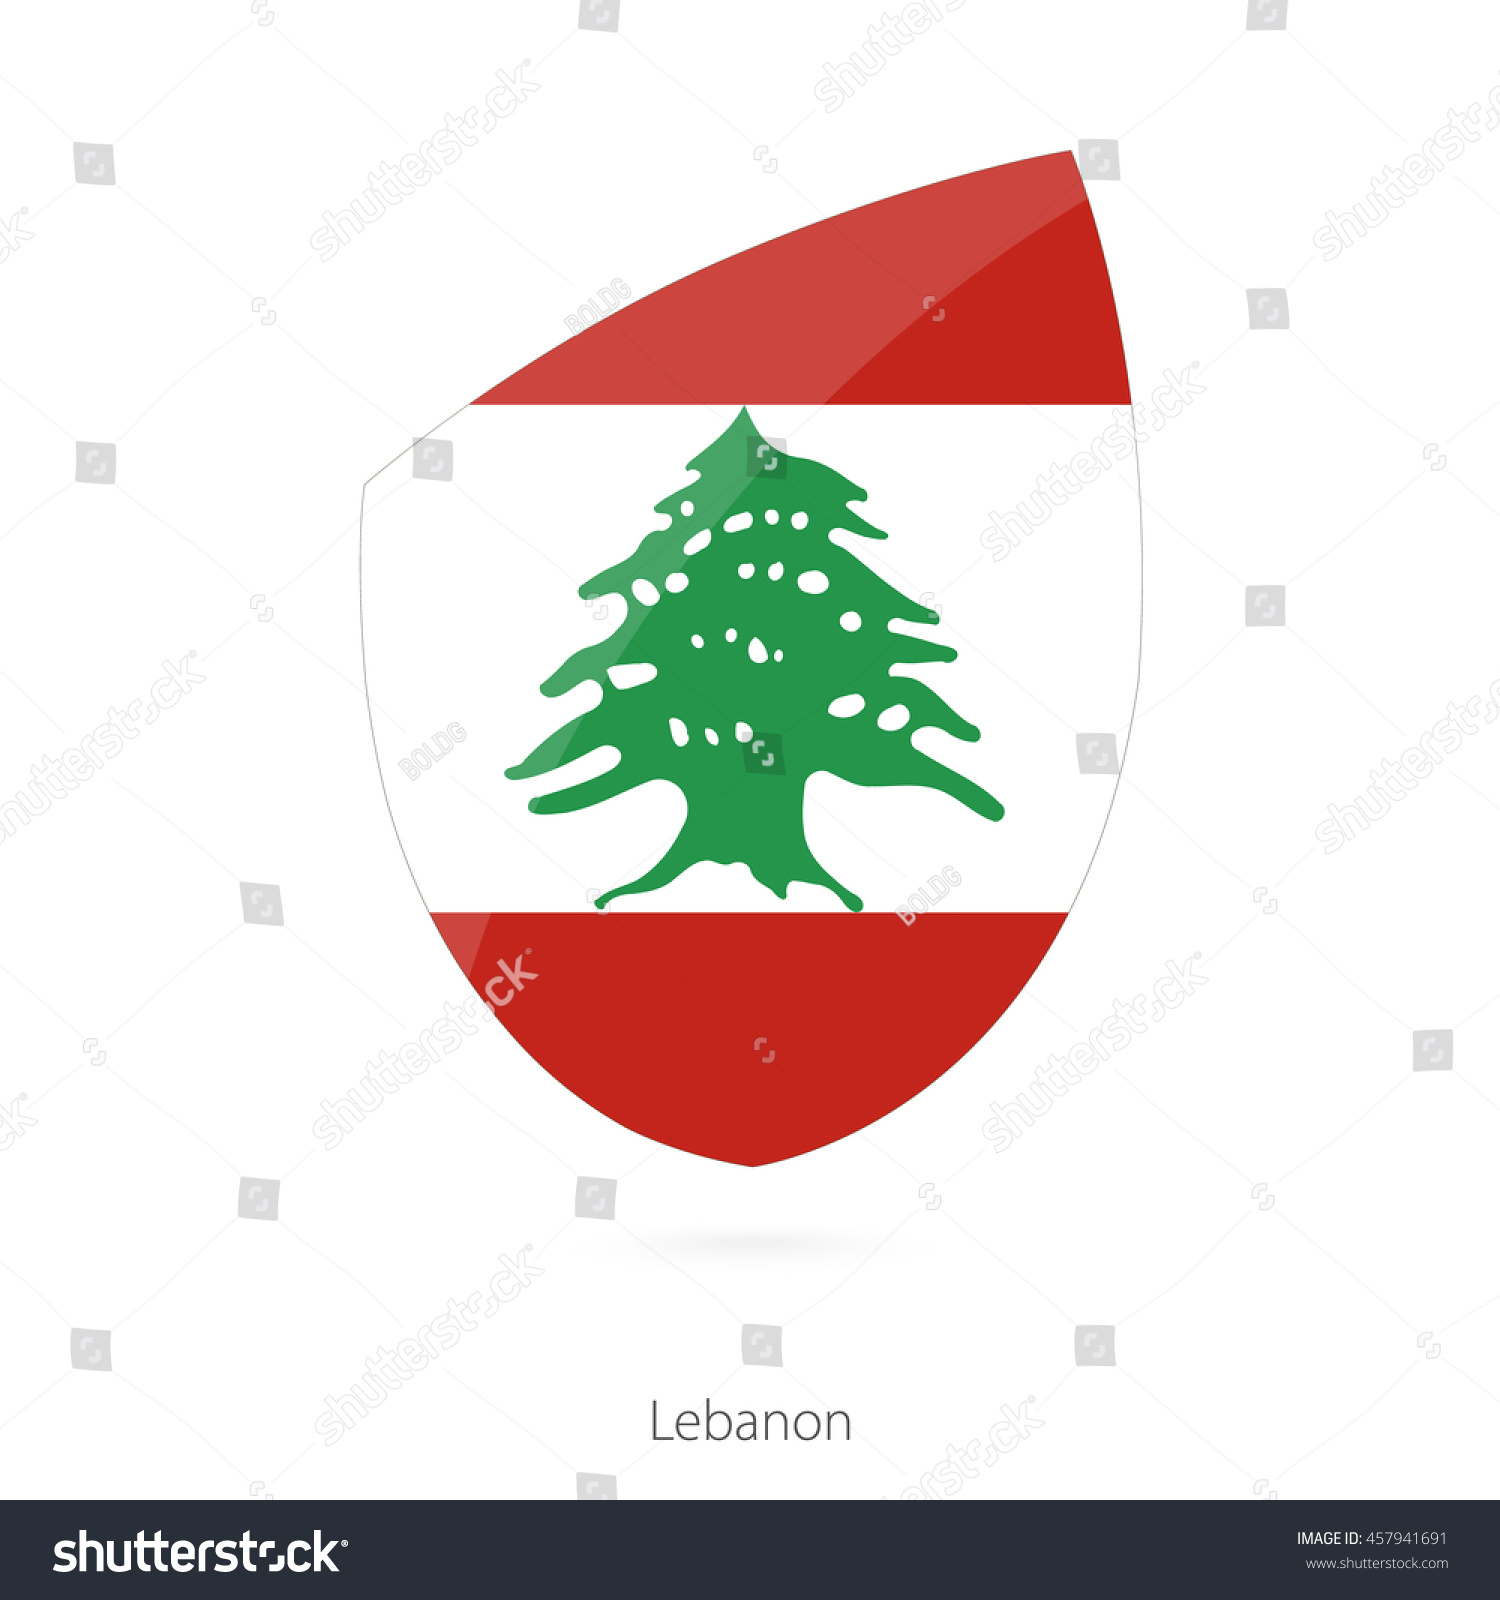 125 Rugby lebanon Images, Stock Photos & Vectors | Shutterstock